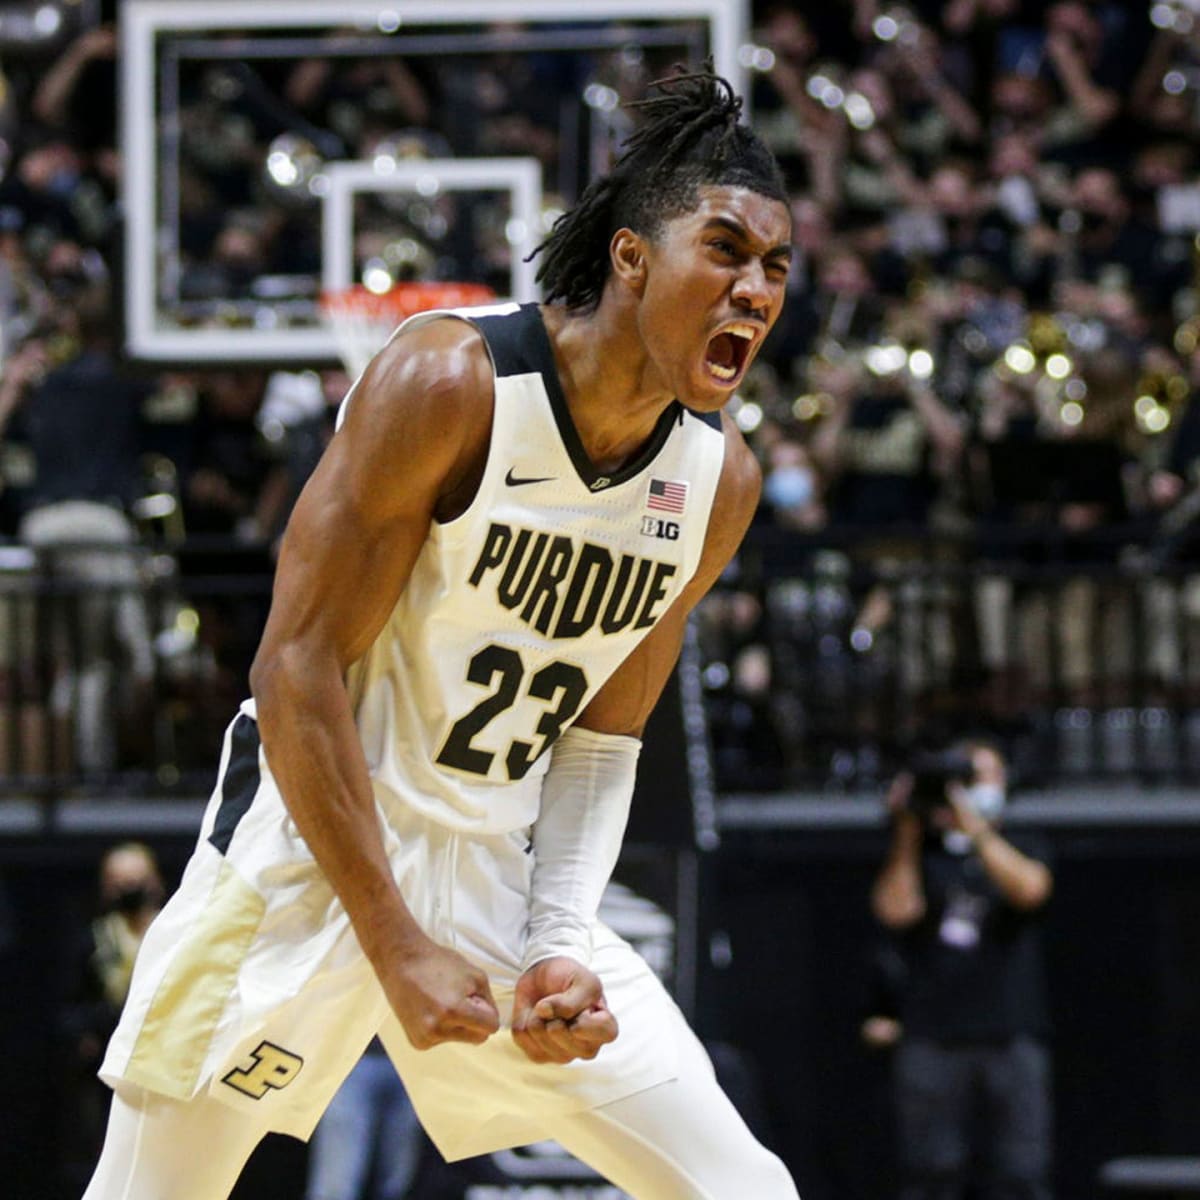 Purdue Men's Basketball on X: RT @IveyJaden: So excited for the